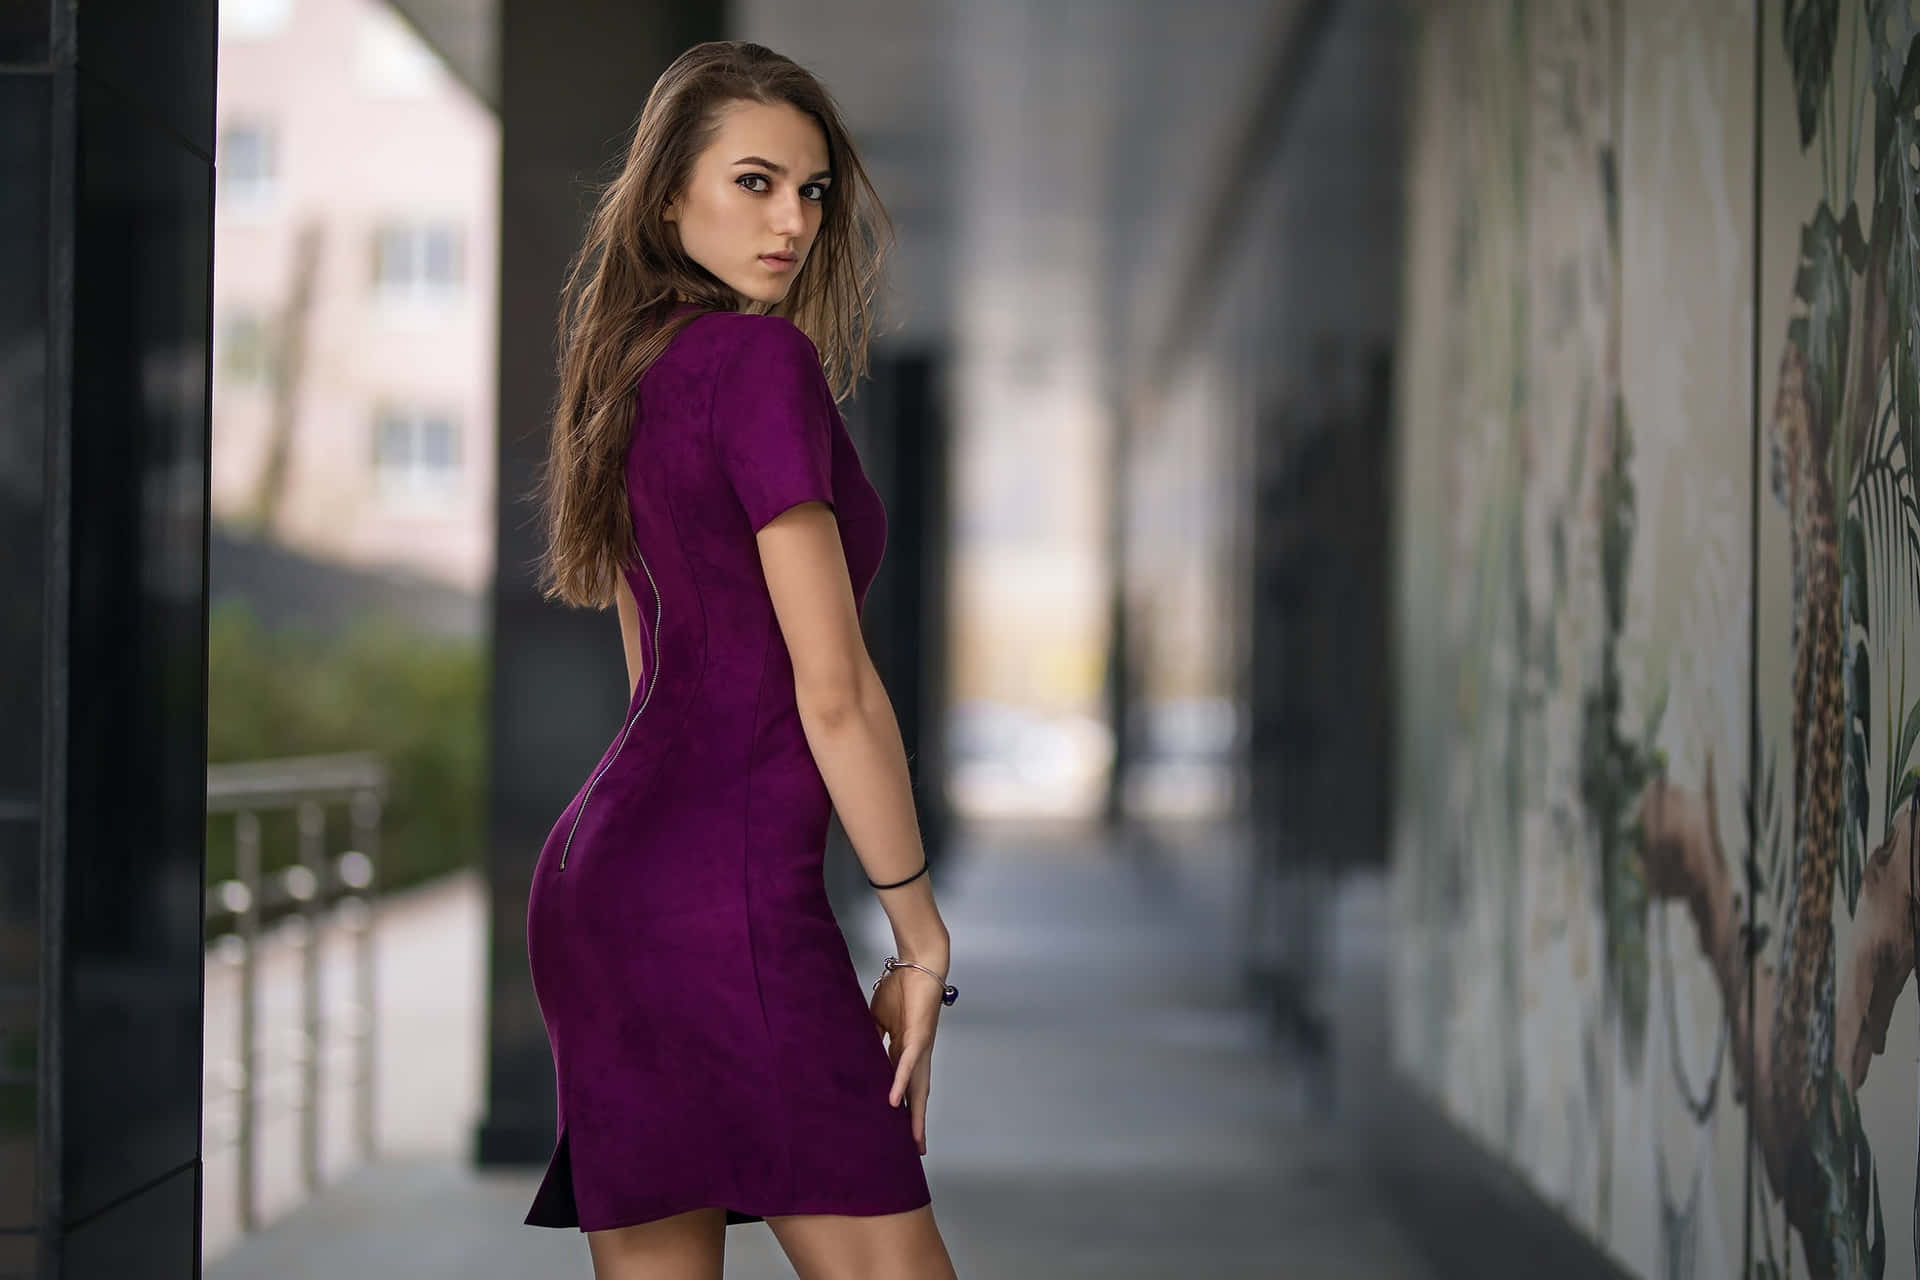 Add a splash of color to your wardrobe with this flattering purple dress. Wallpaper